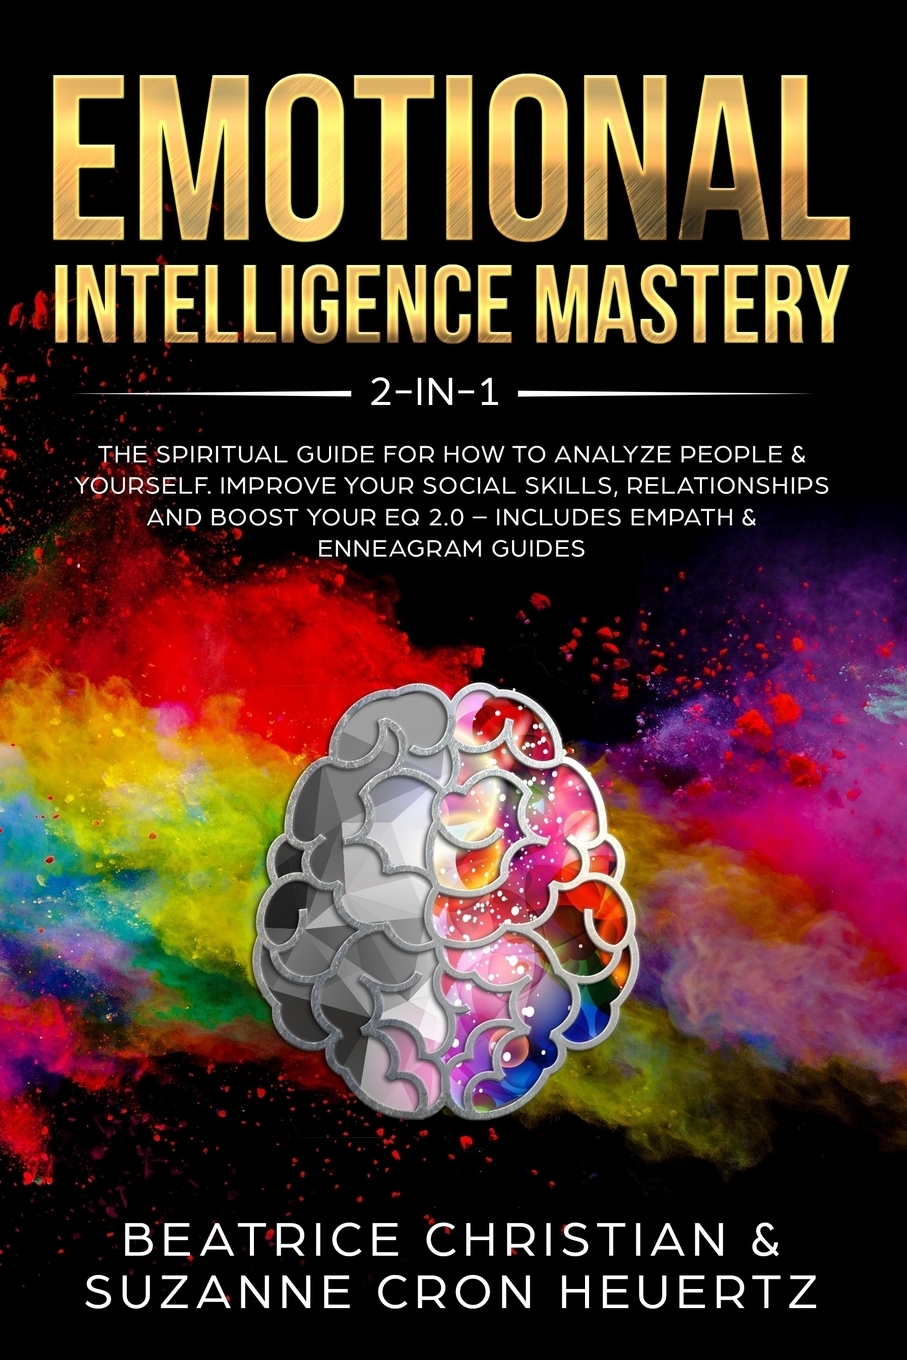 Emotional Intelligence Mastery 2-in-1. The Spiritual Guide for how to analyze people & yourself. Improve your social skills, relationships and boost your EQ 2.0 - Includes Empath & Enneagram Guides